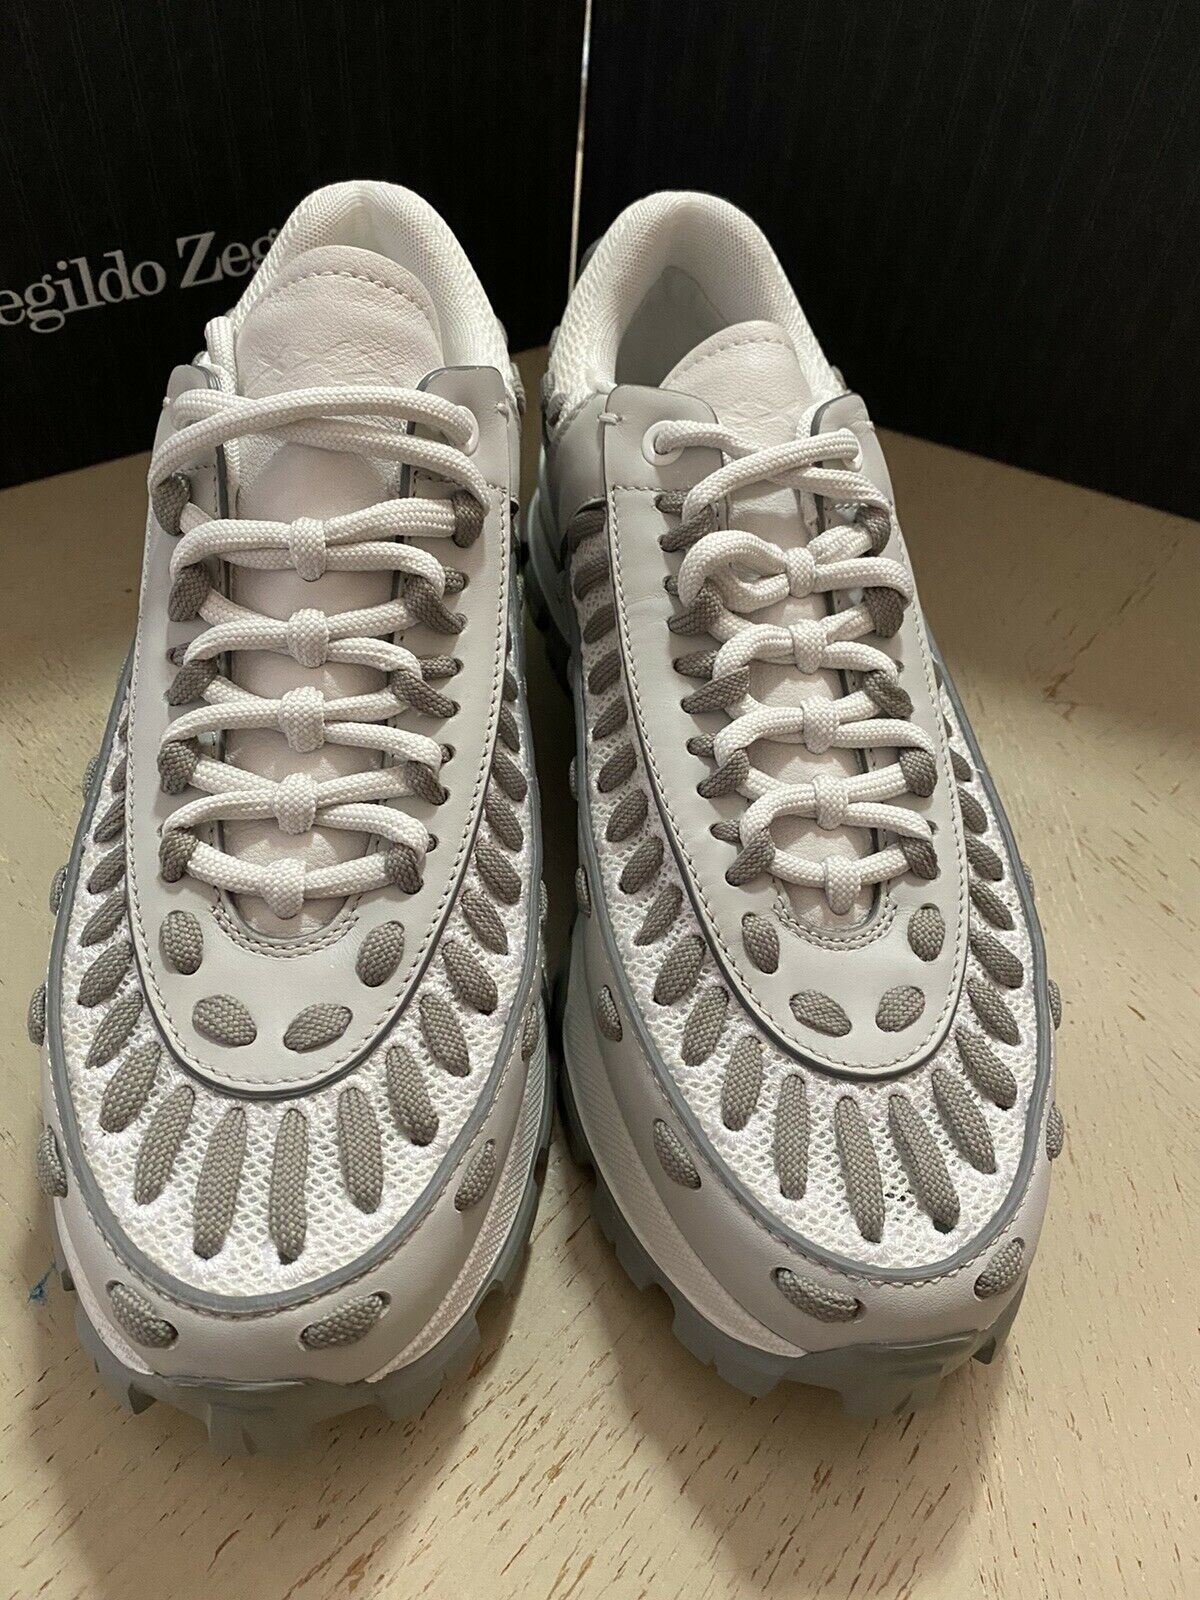 New $795 Ermenegildo Zegna Couture Leather Sneakers Shoes White/Gray 9 US Italy